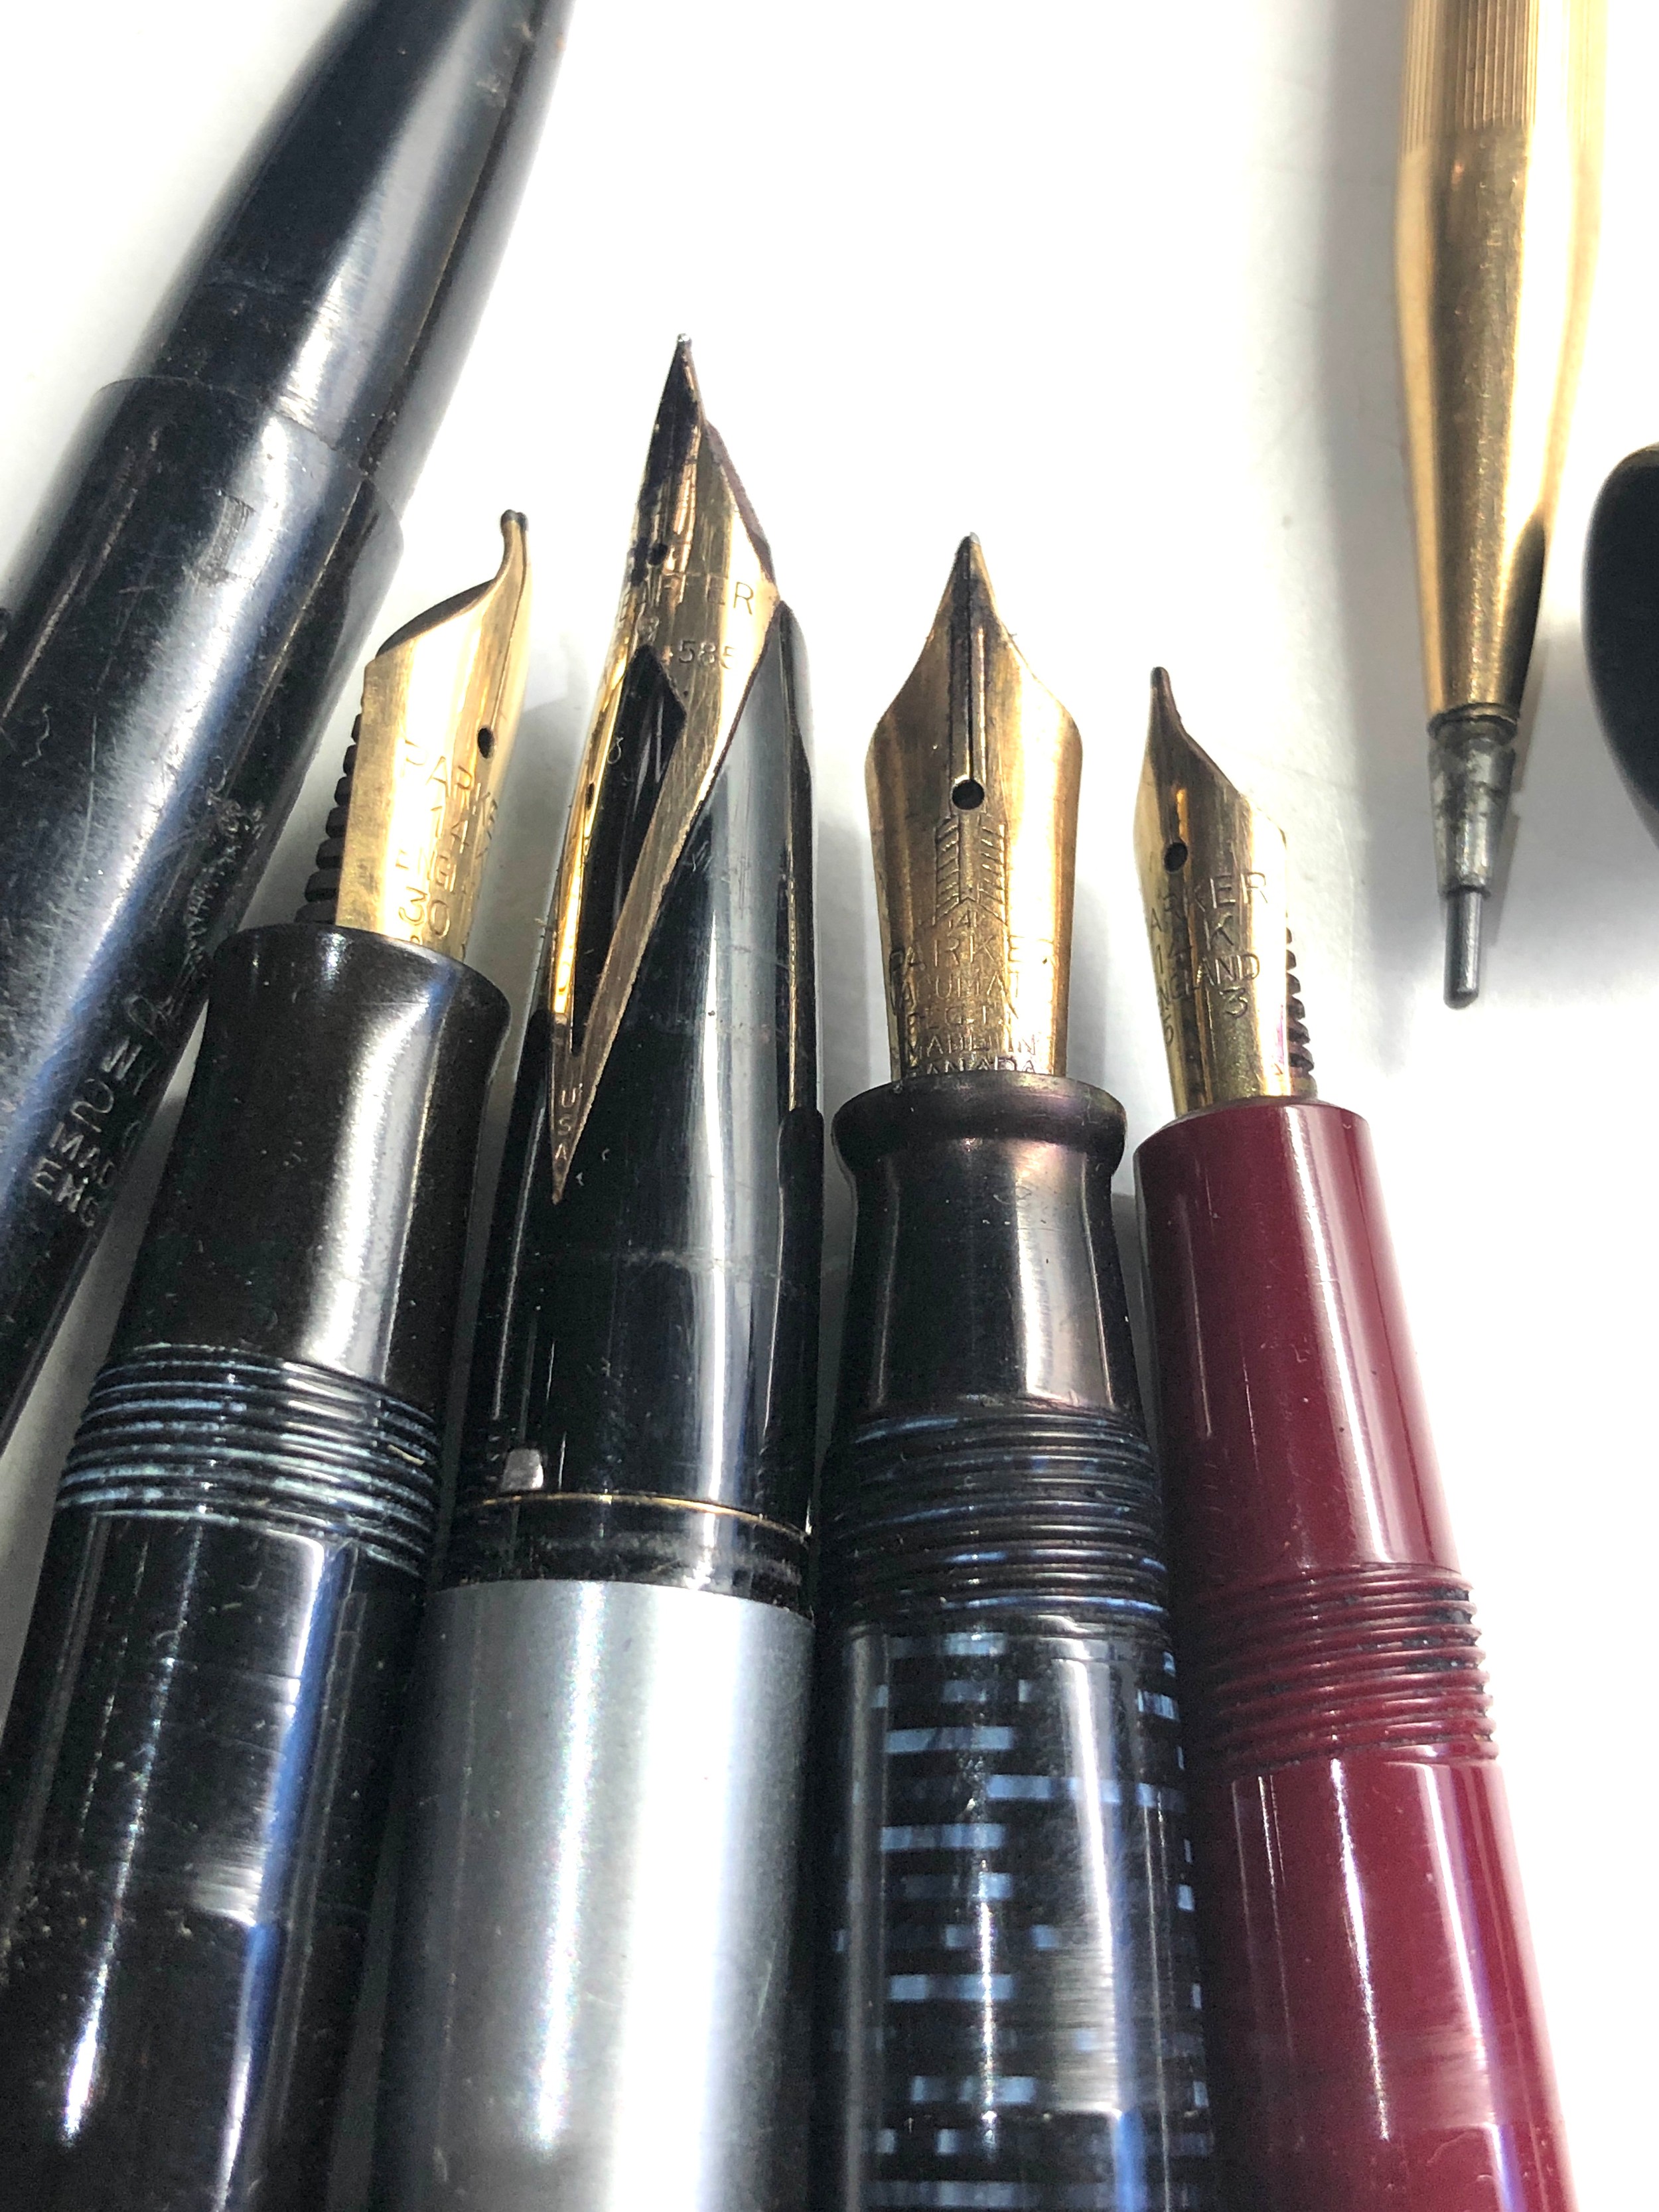 Selection of Vintage fountain pens includes 14ct gold nib parkers sheaffer wyvern etc - Image 5 of 5